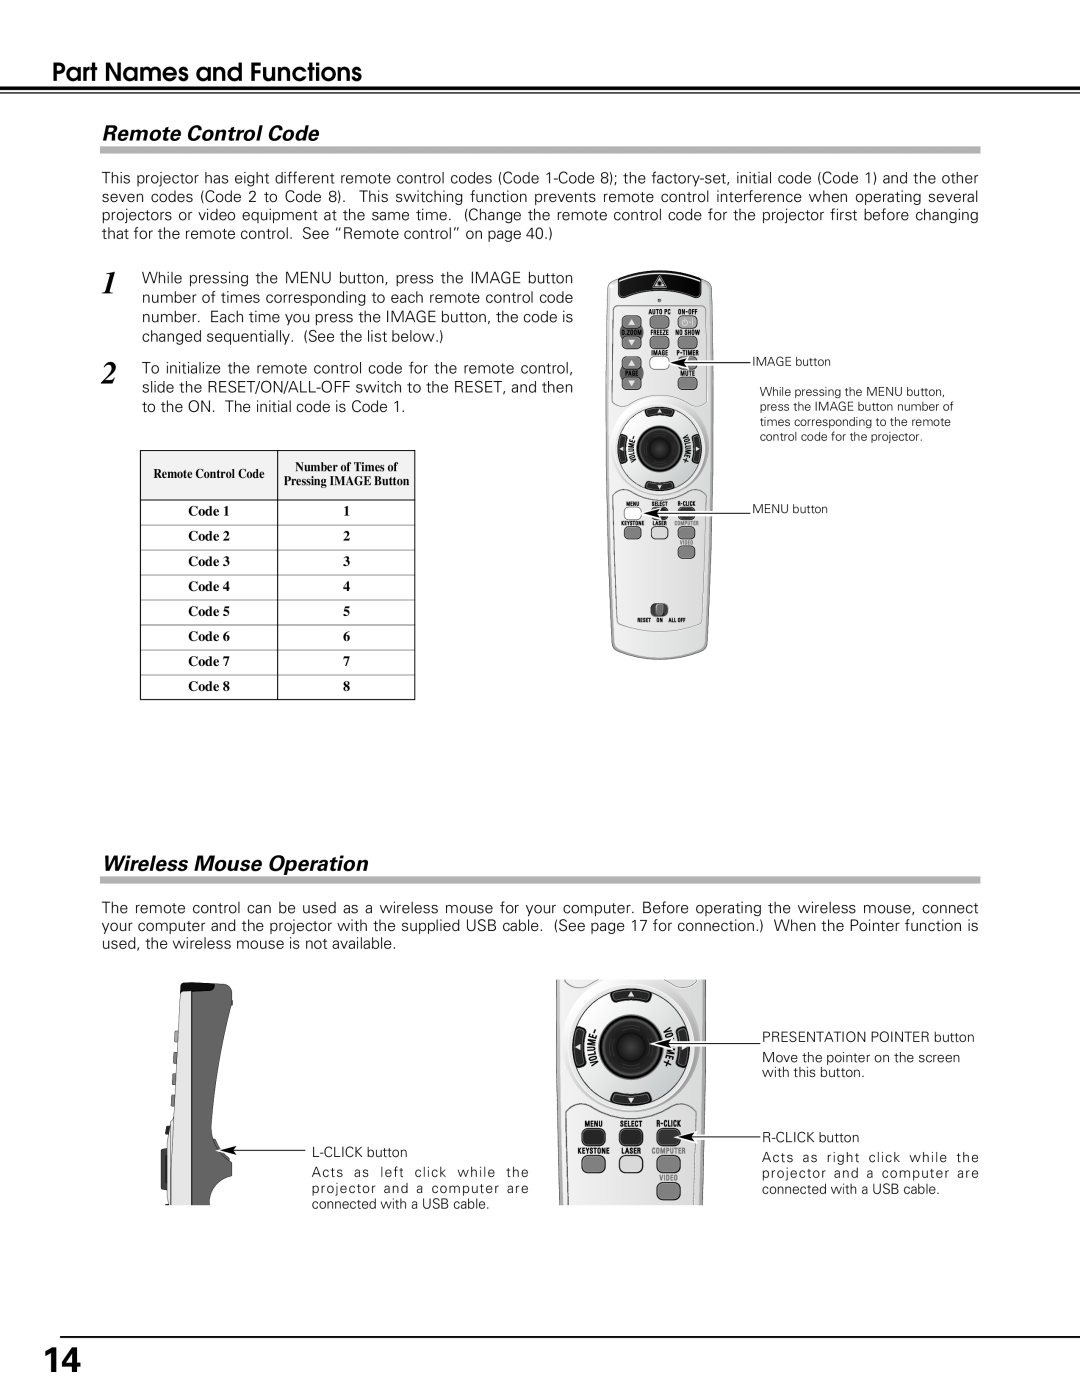 Sanyo PLC-SL20 owner manual Remote Control Code, Wireless Mouse Operation, Part Names and Functions 